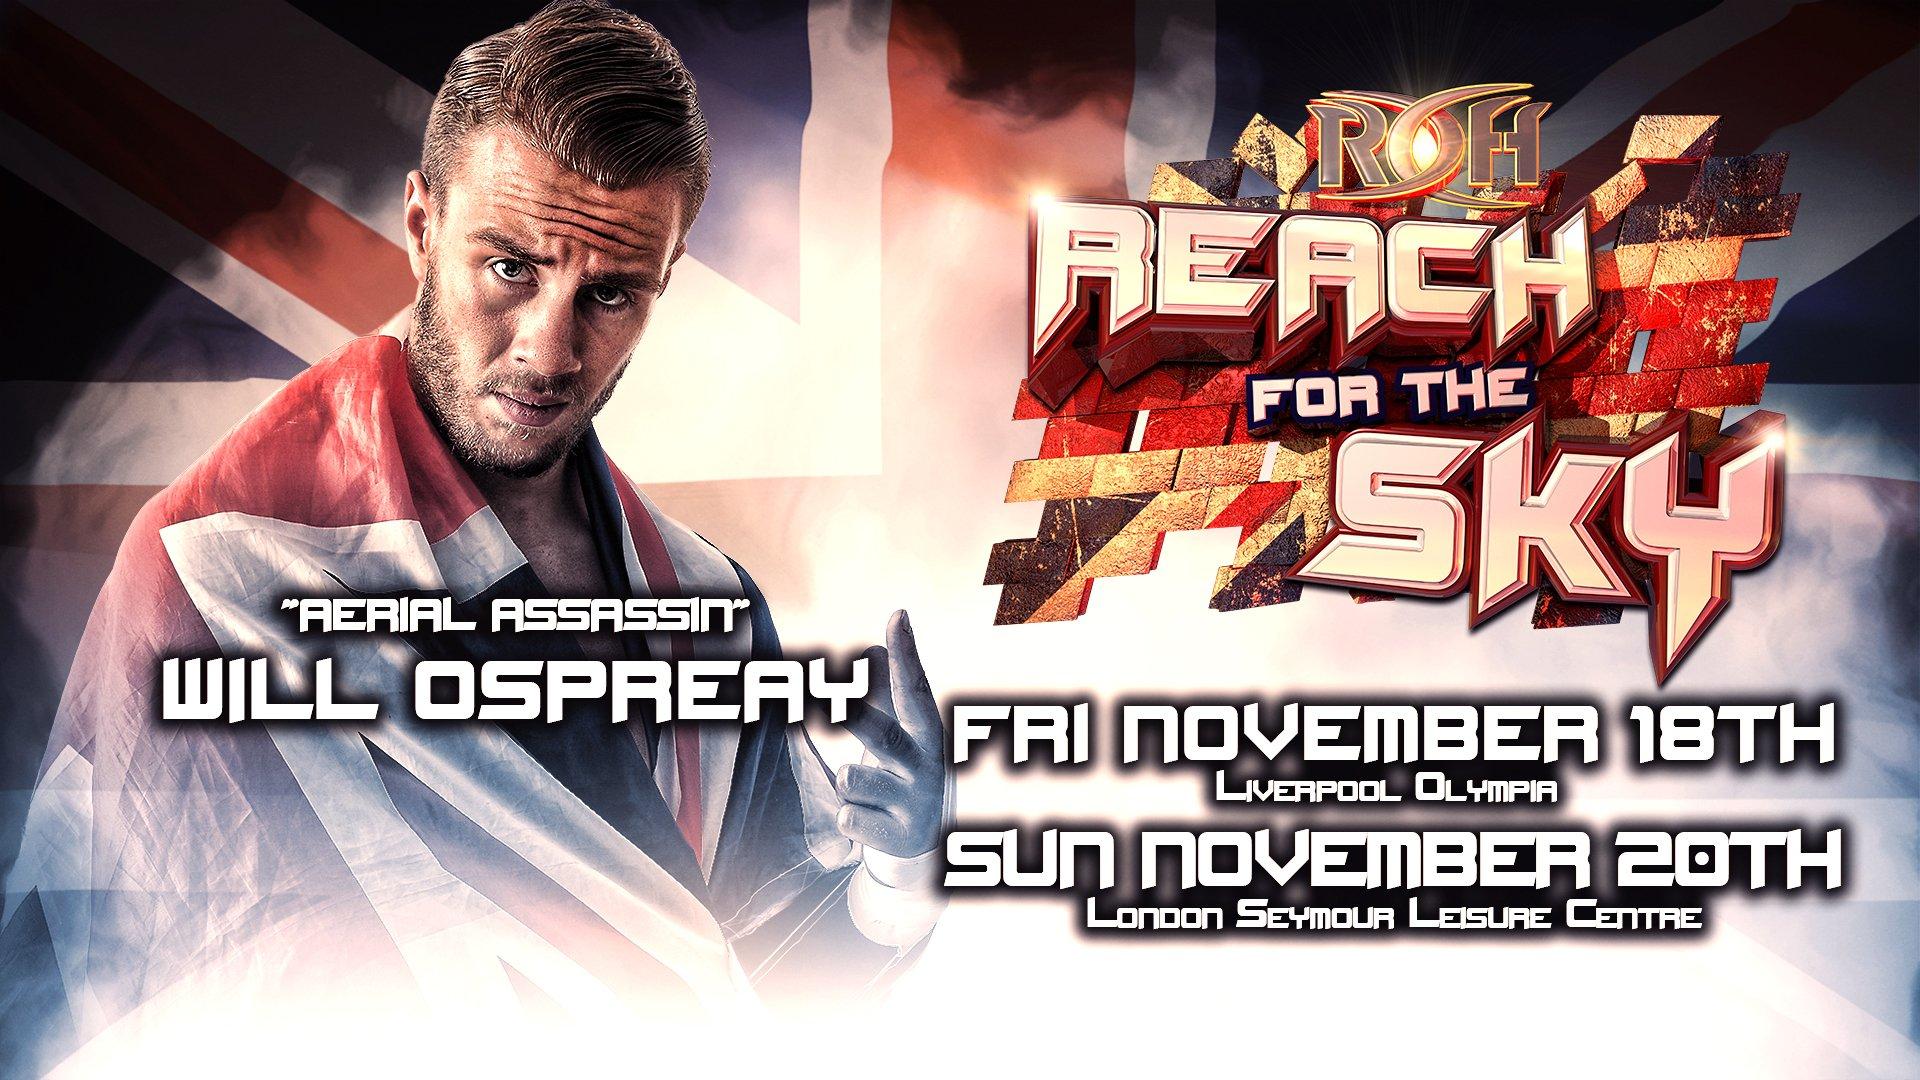 More Details on Will Ospreay Making Ring of Honor Debut, WWE Makes